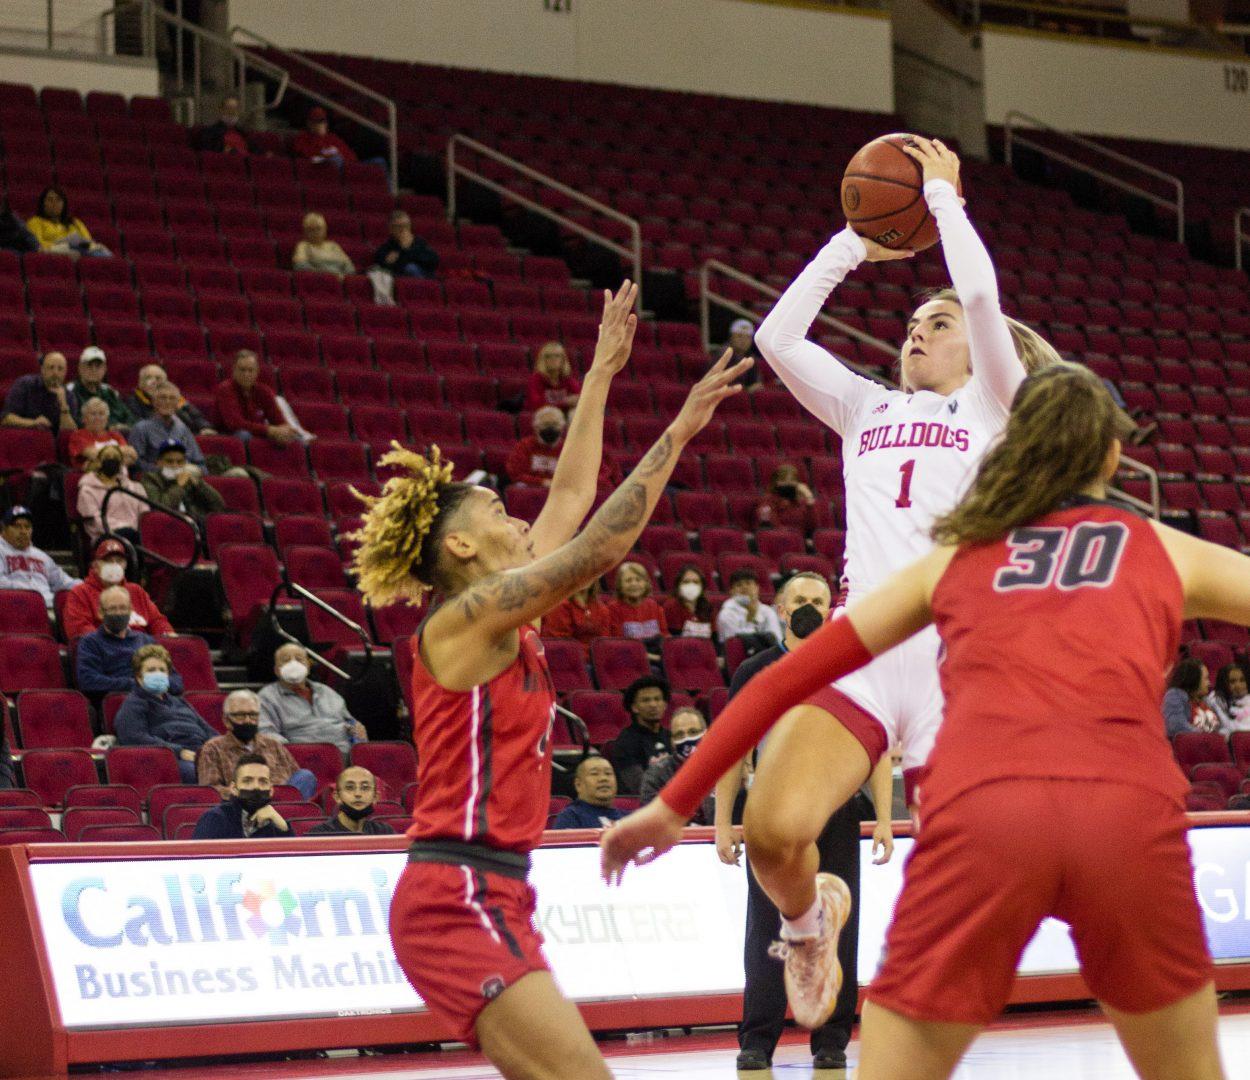 Haley+Cavinder+shoots+the+ball+in+the+game+against+New+Mexico+on+Feb.+23%2C+2022.+%28Julia+Espinoza%2F+The+Collegian%29